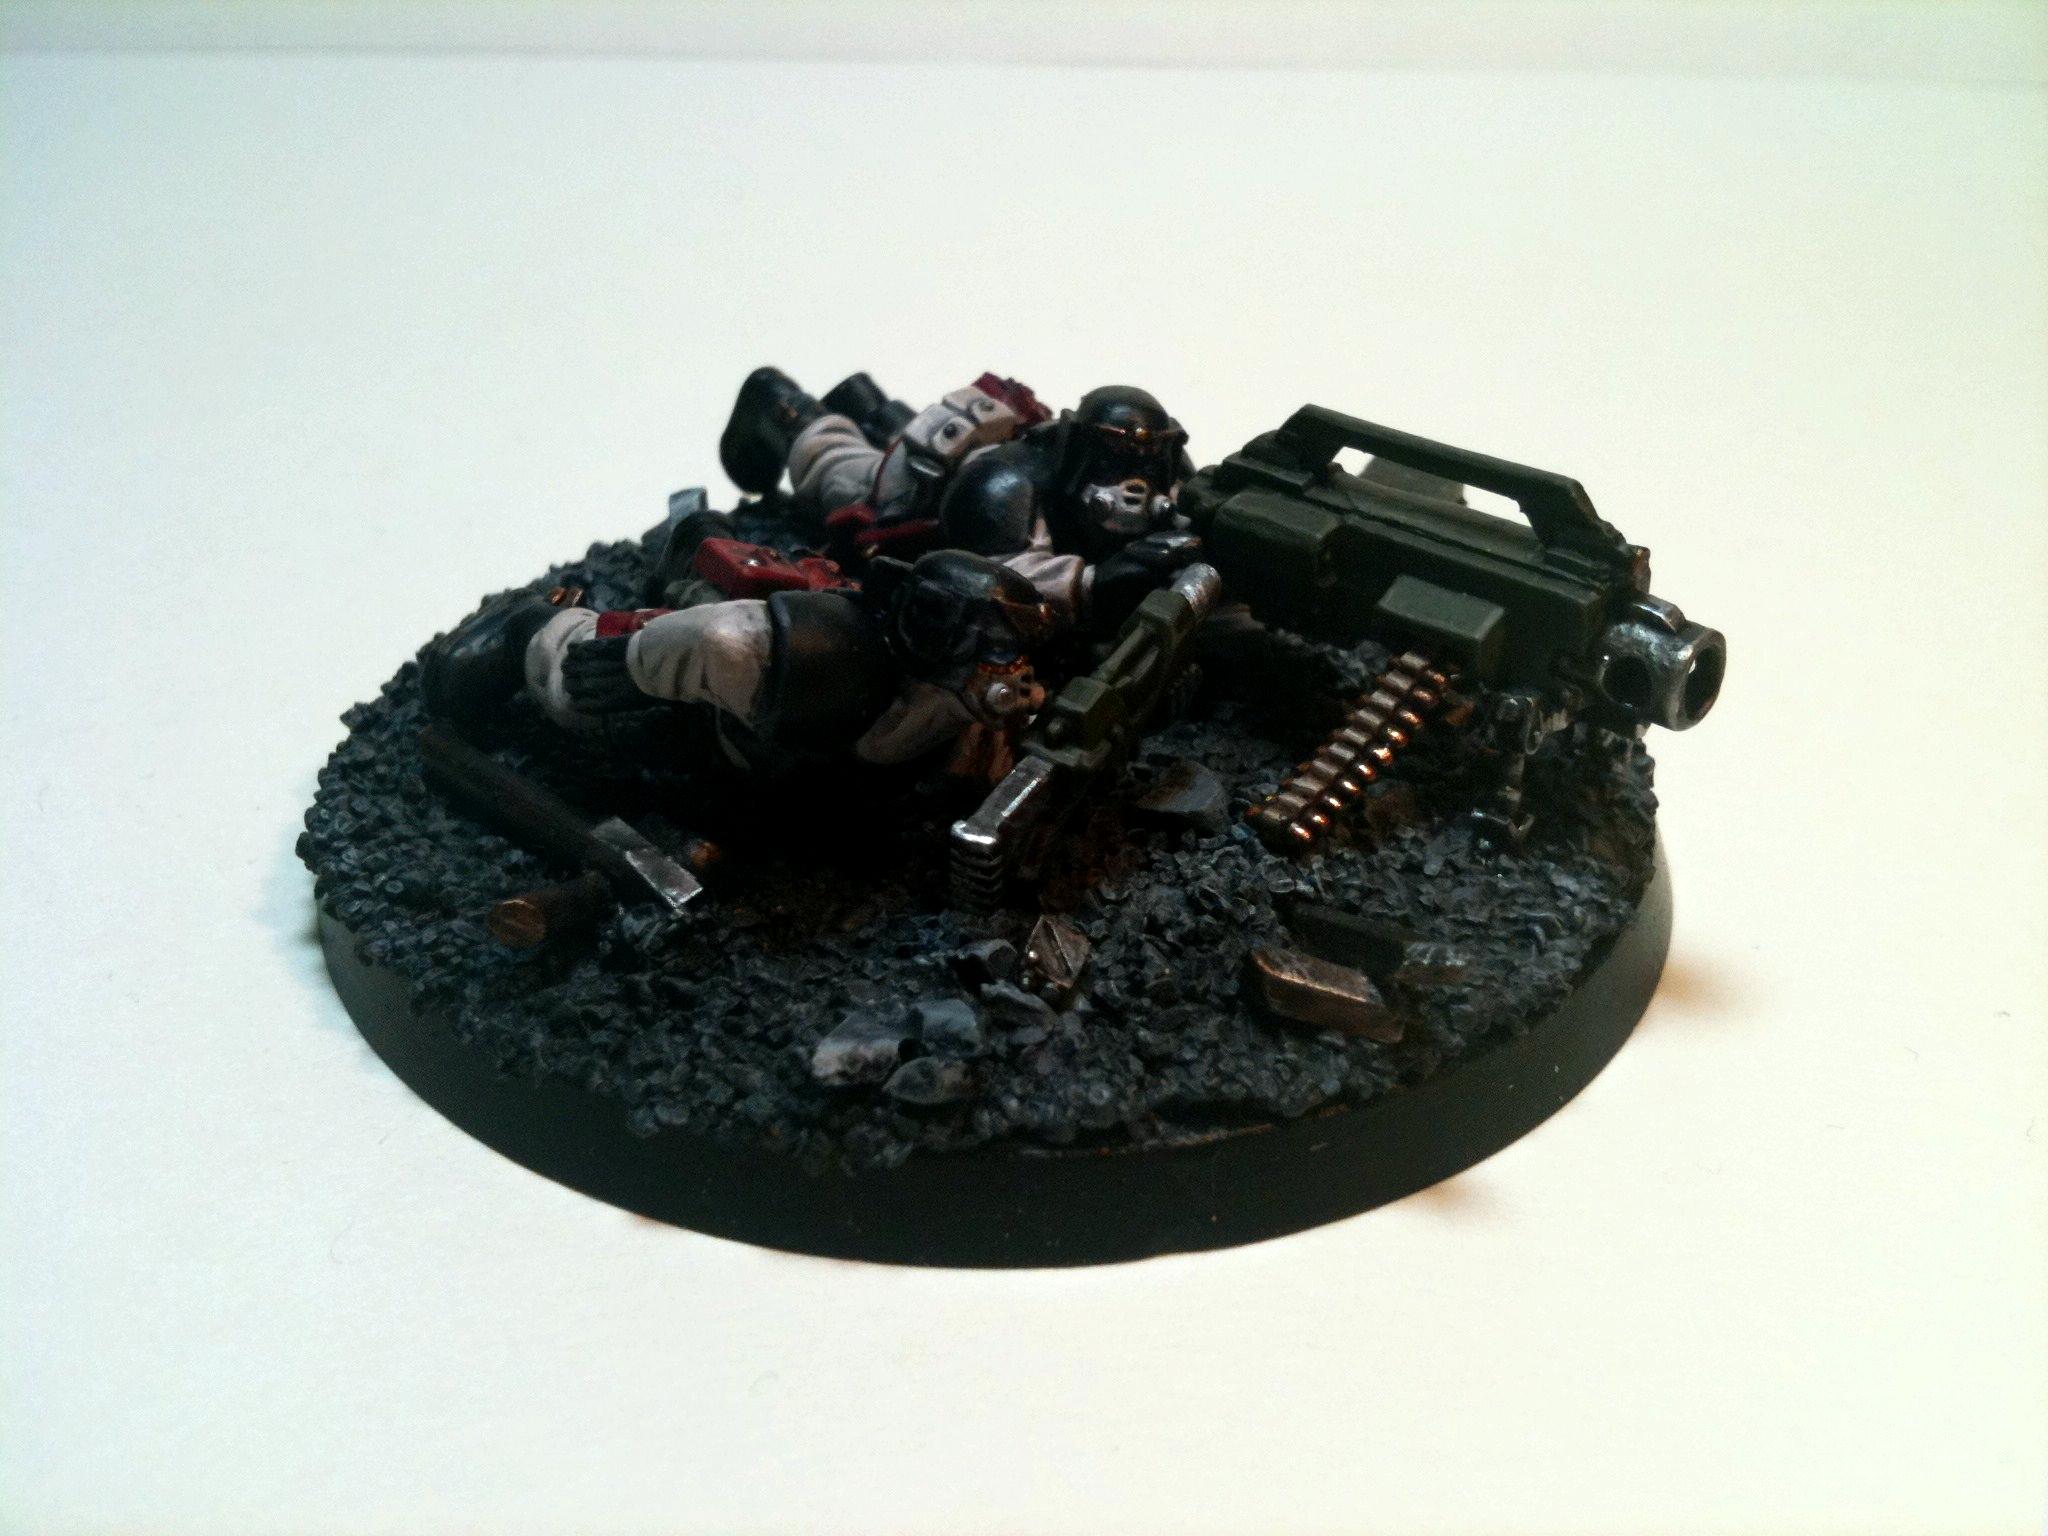 Heavy Bolter, Imperial Guard, Inquisitorial